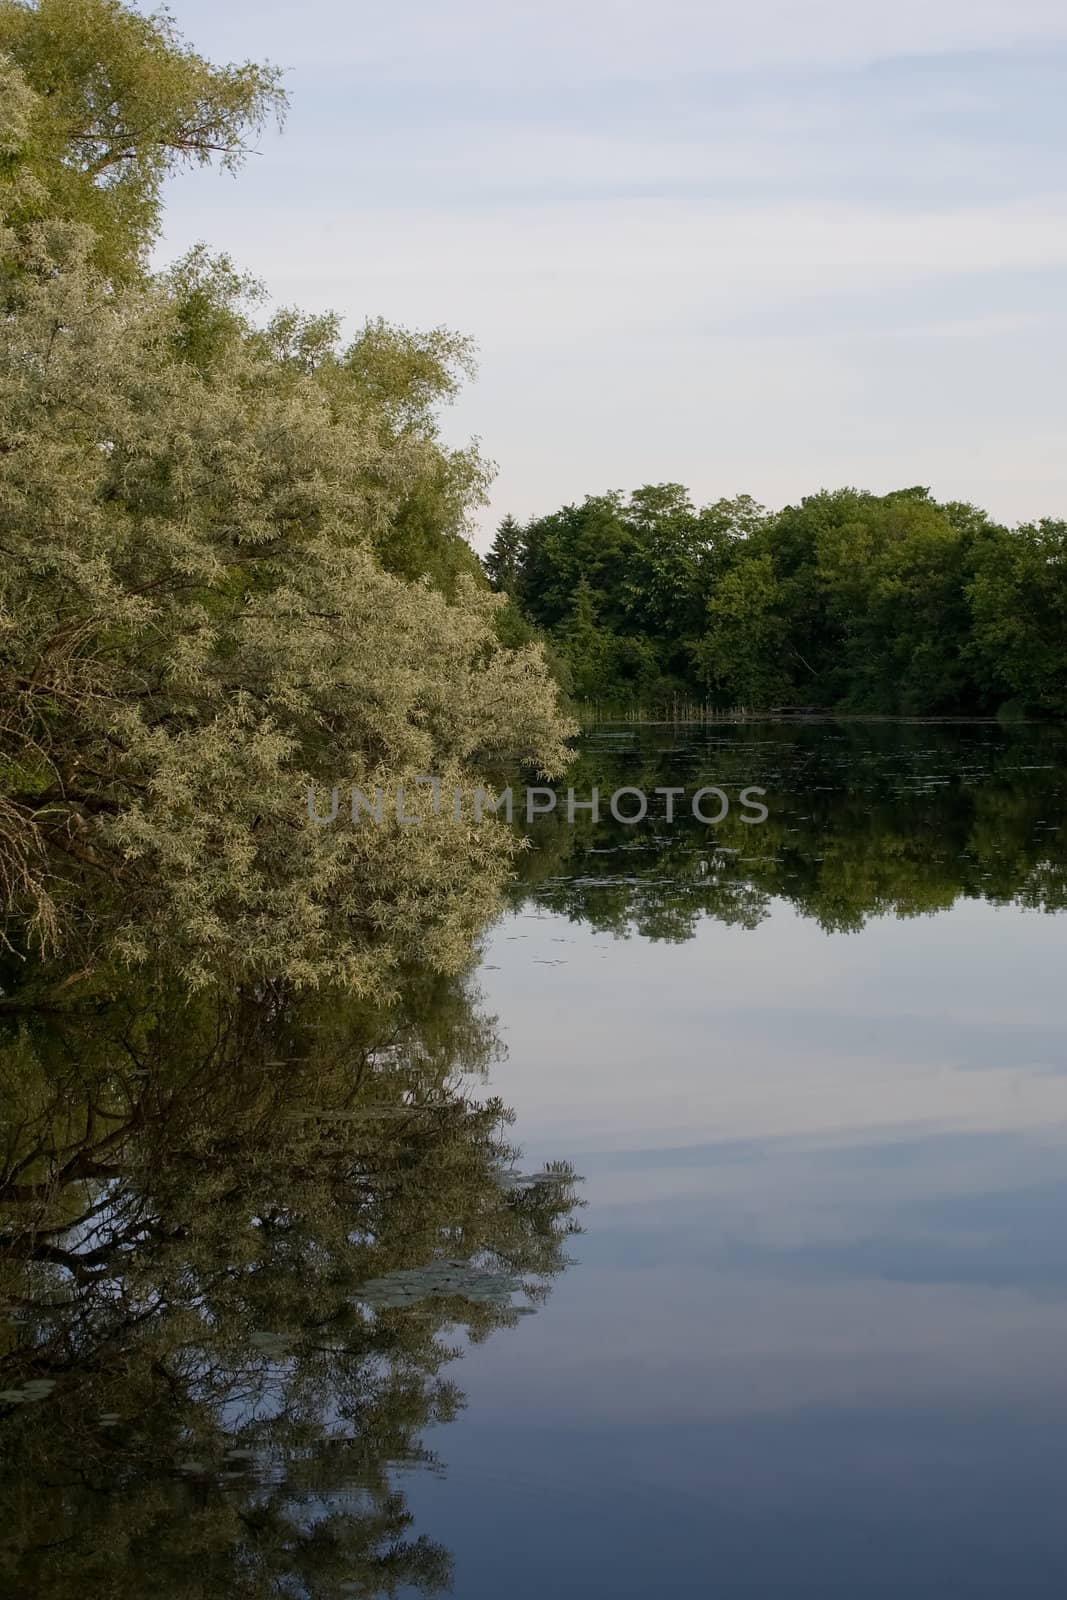 Large tree on the left side overhanging a pond with full reflection of the tree and sky.